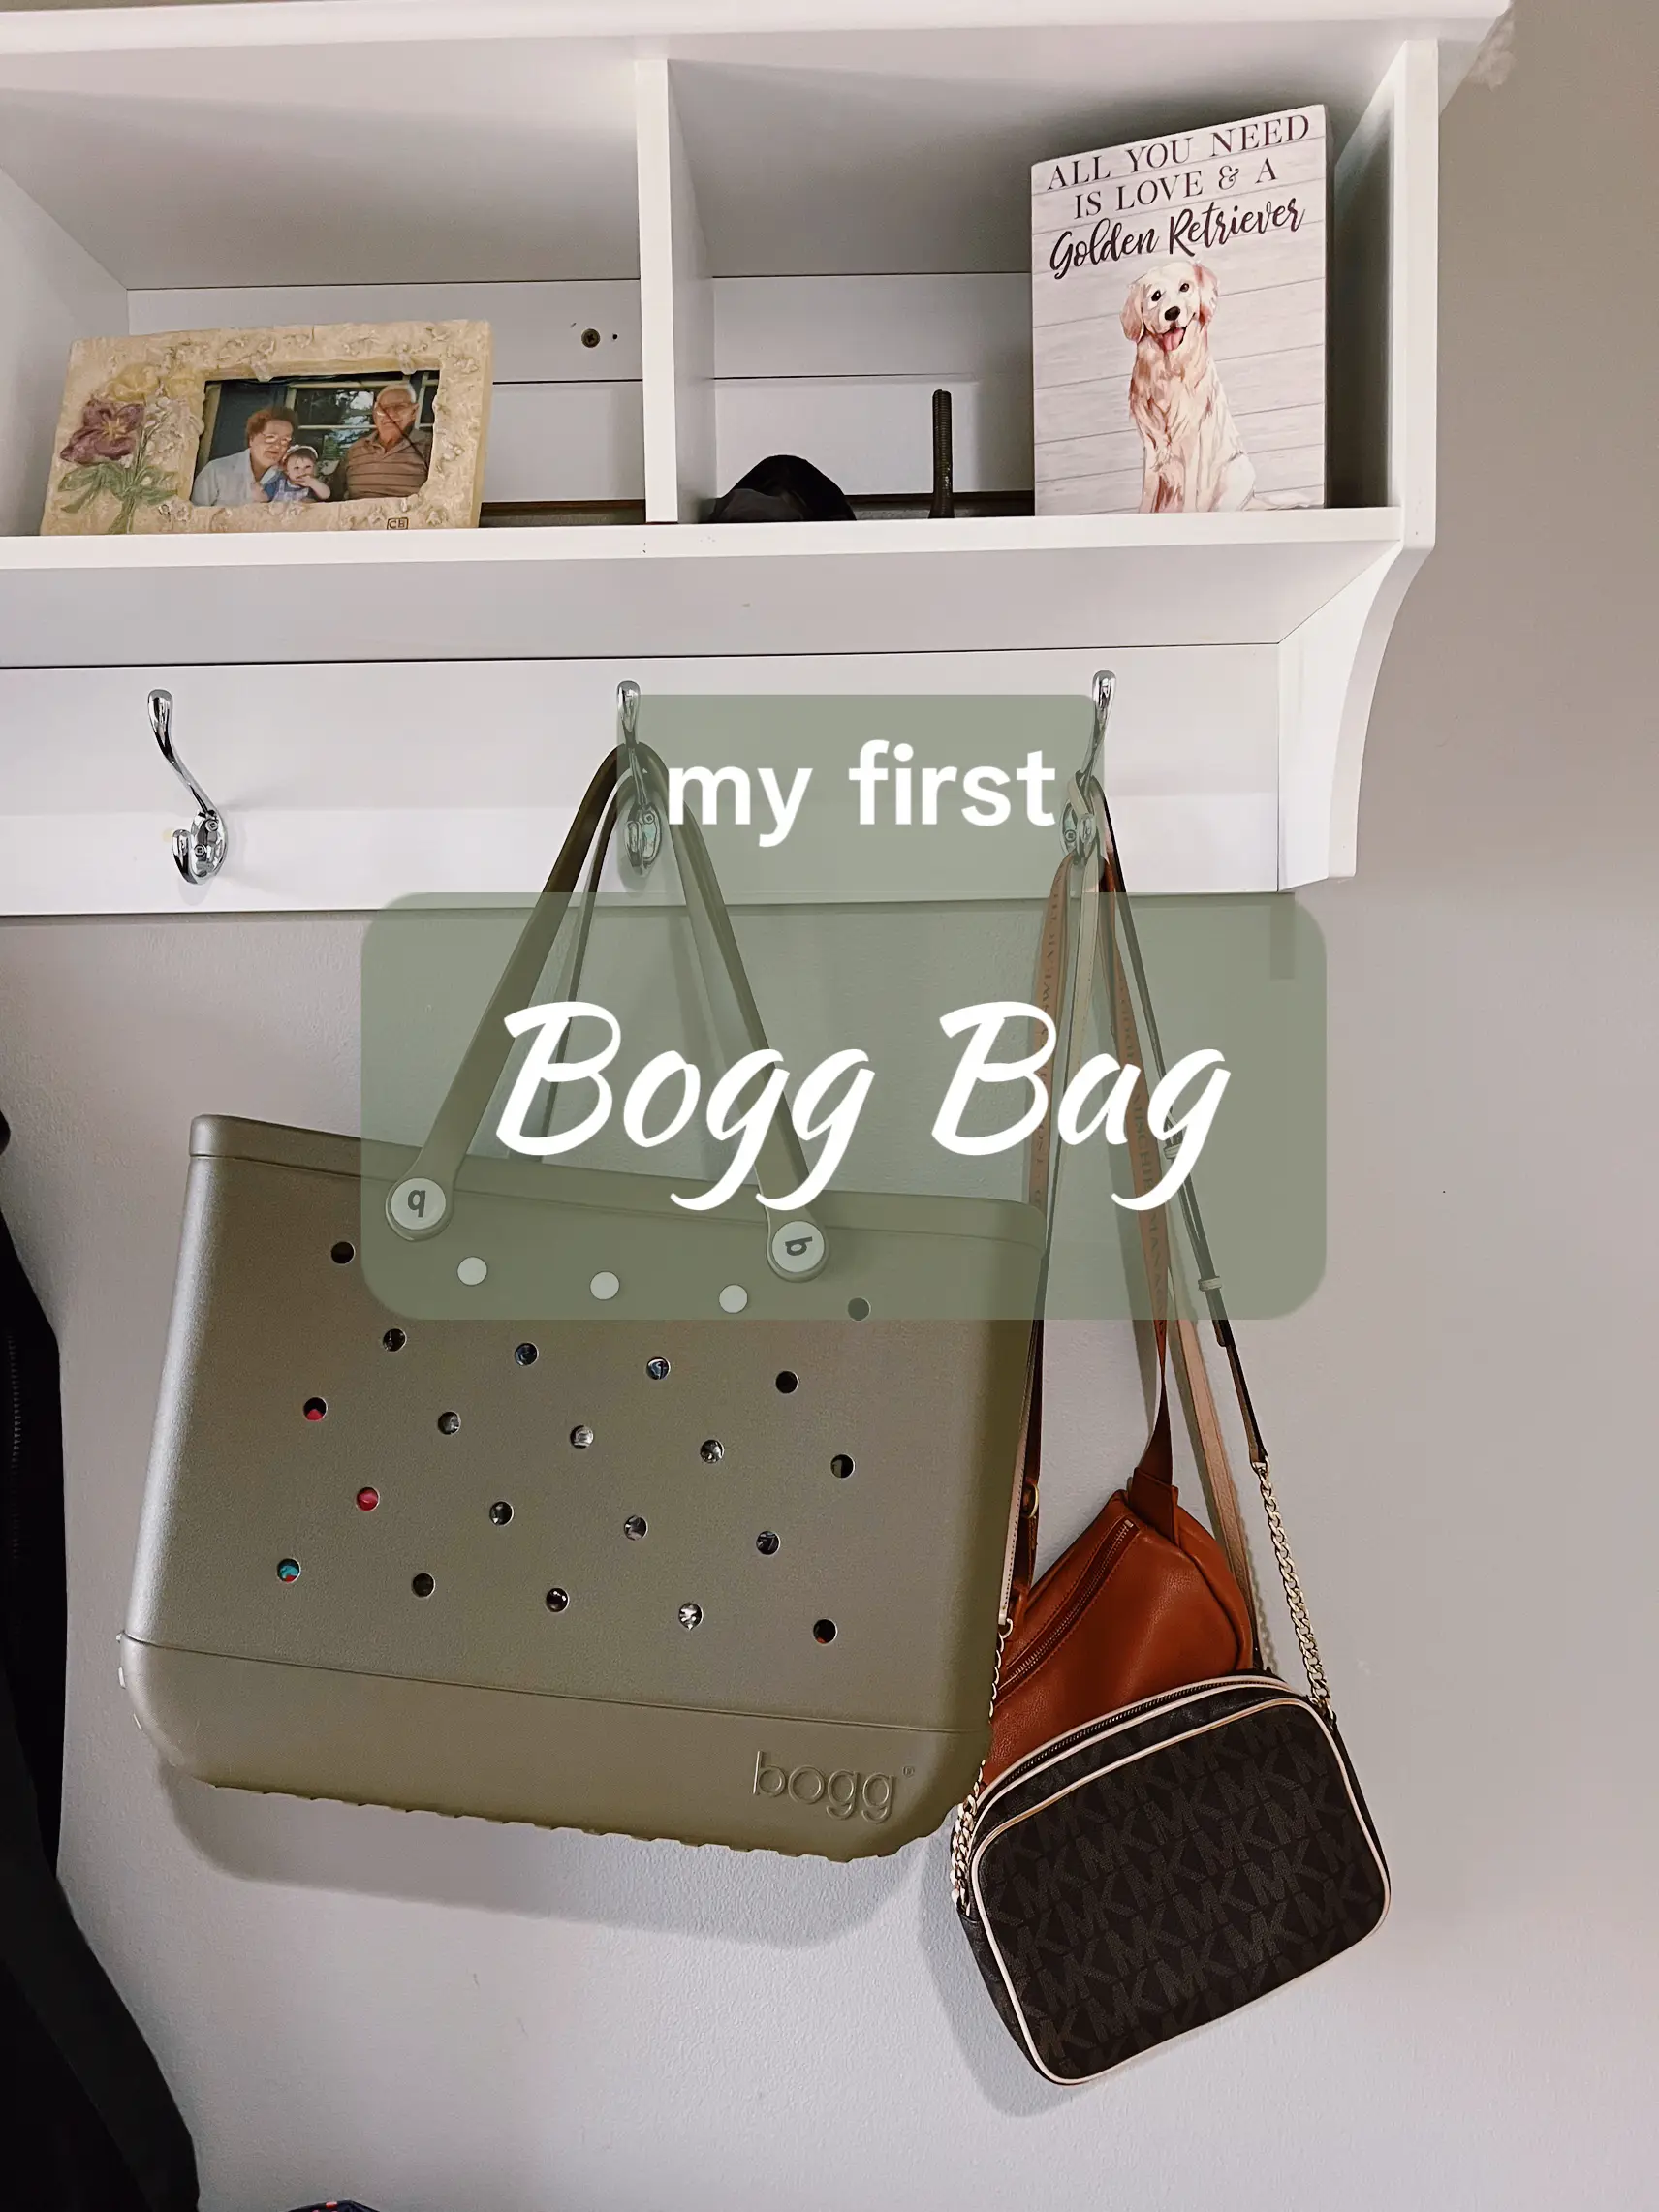 Bogg bag! 🌊, Gallery posted by Katie Sparks